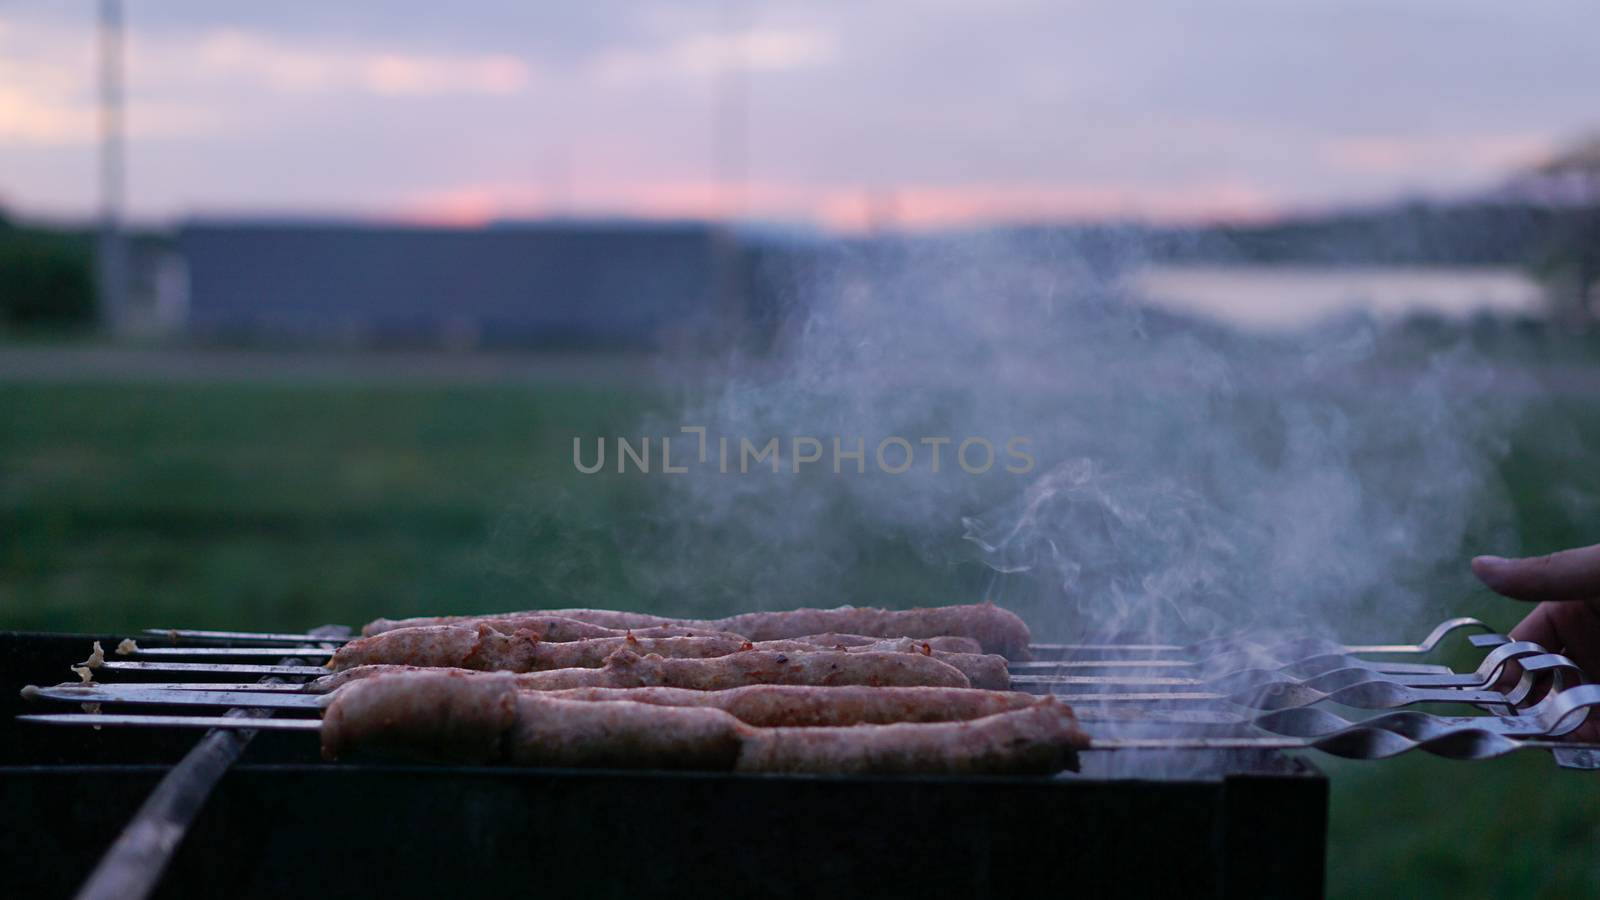 Grilling sausages at sunset outdoors gathering with friends and family. Sunner time